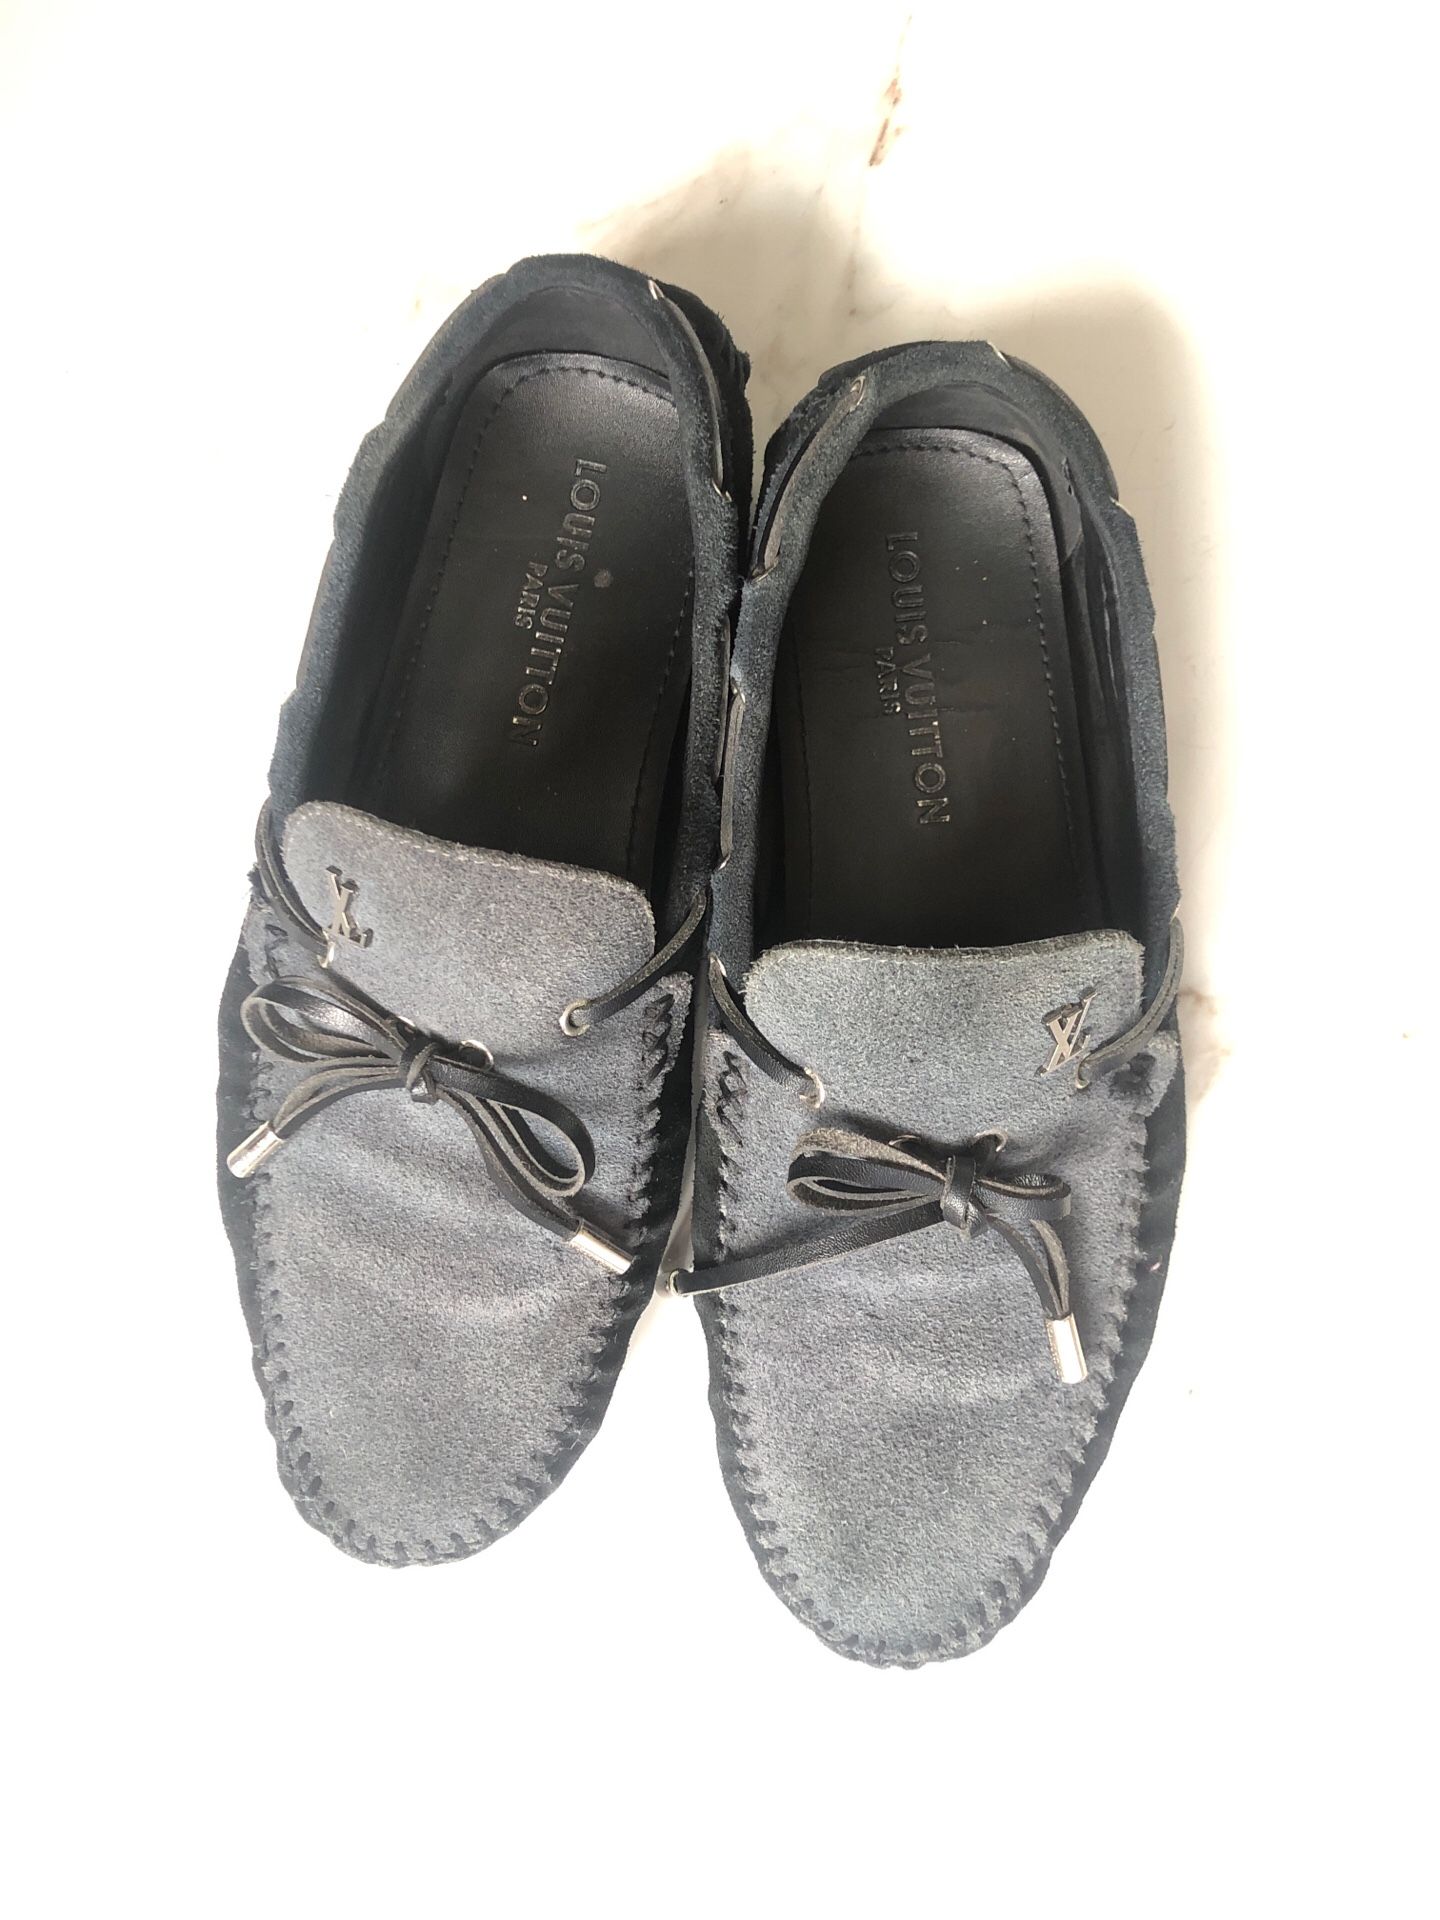 LOUIS Vuitton Driving Loafers (OBO)